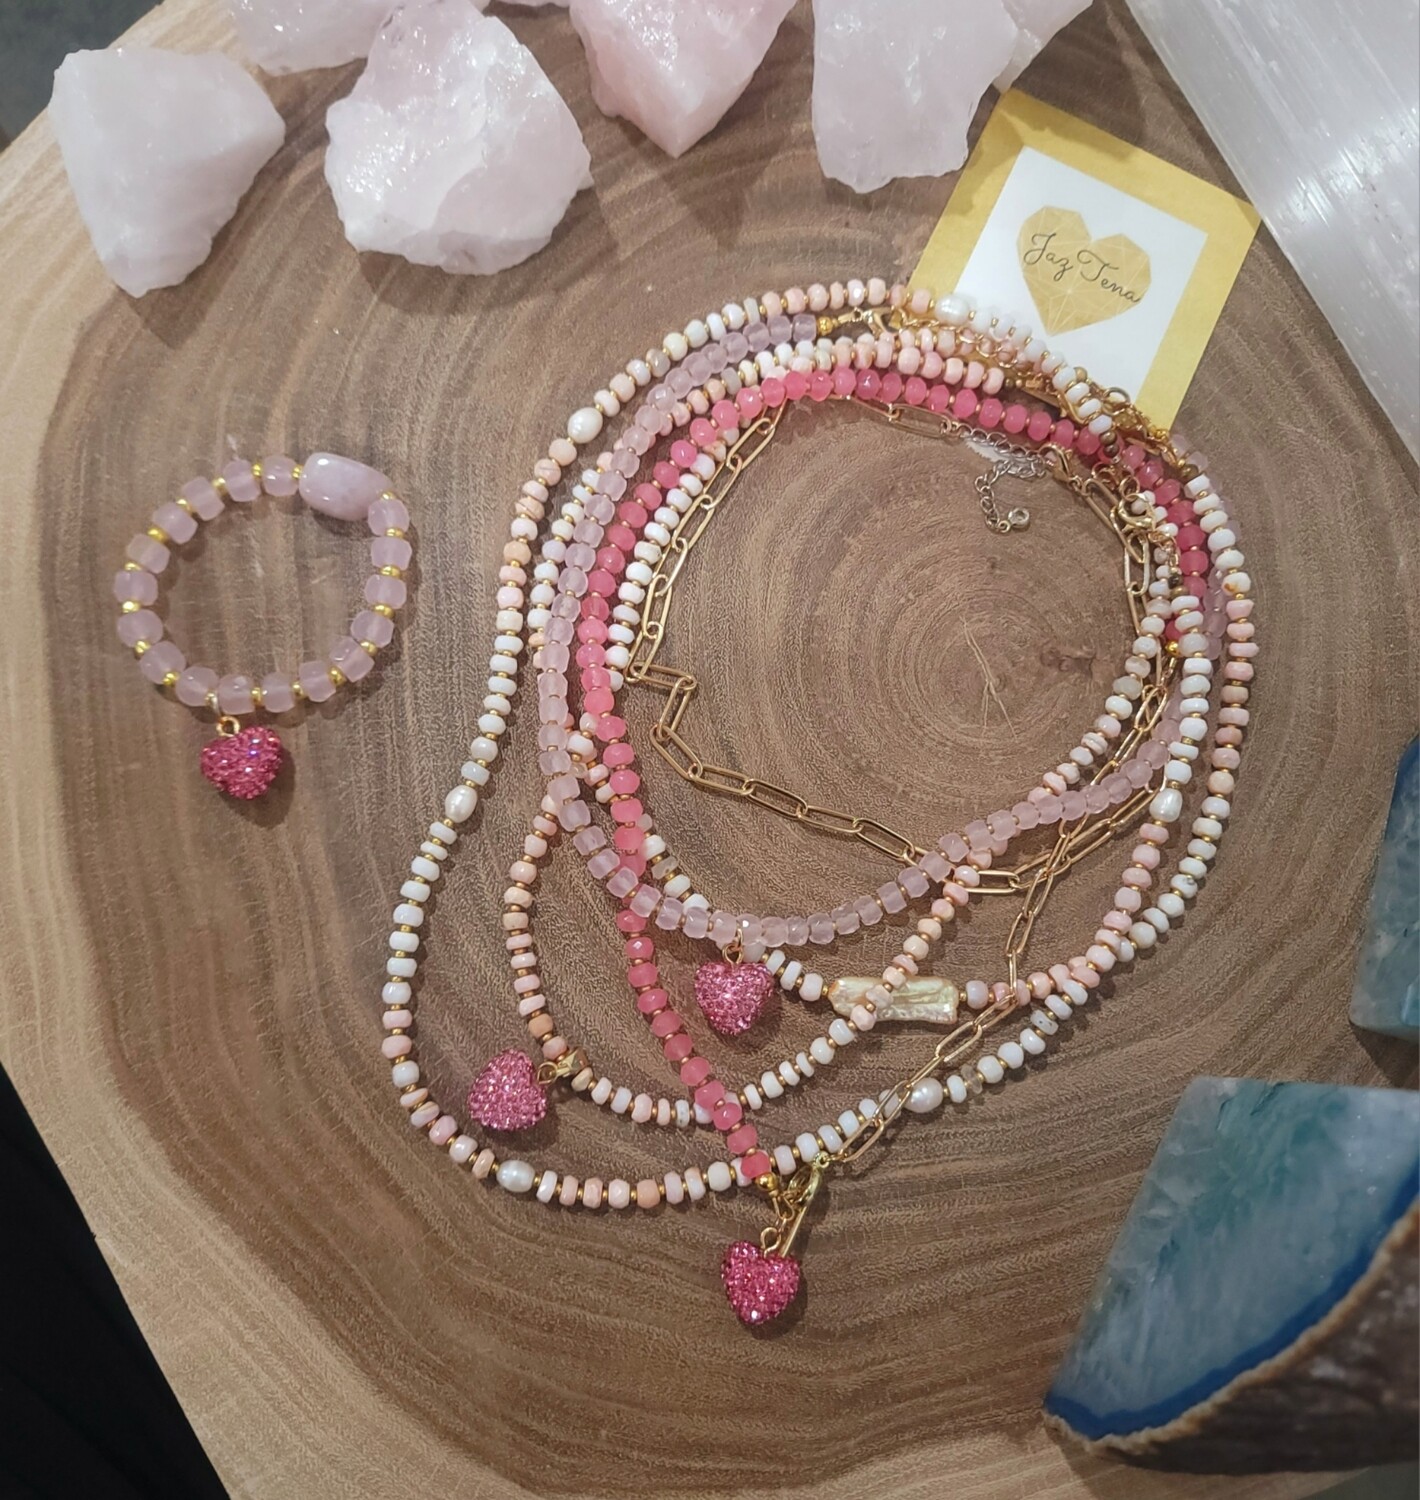 Faceted peruvian opal necklace for women. Ombre pink and white patterns. Opalo de peru con corazones 